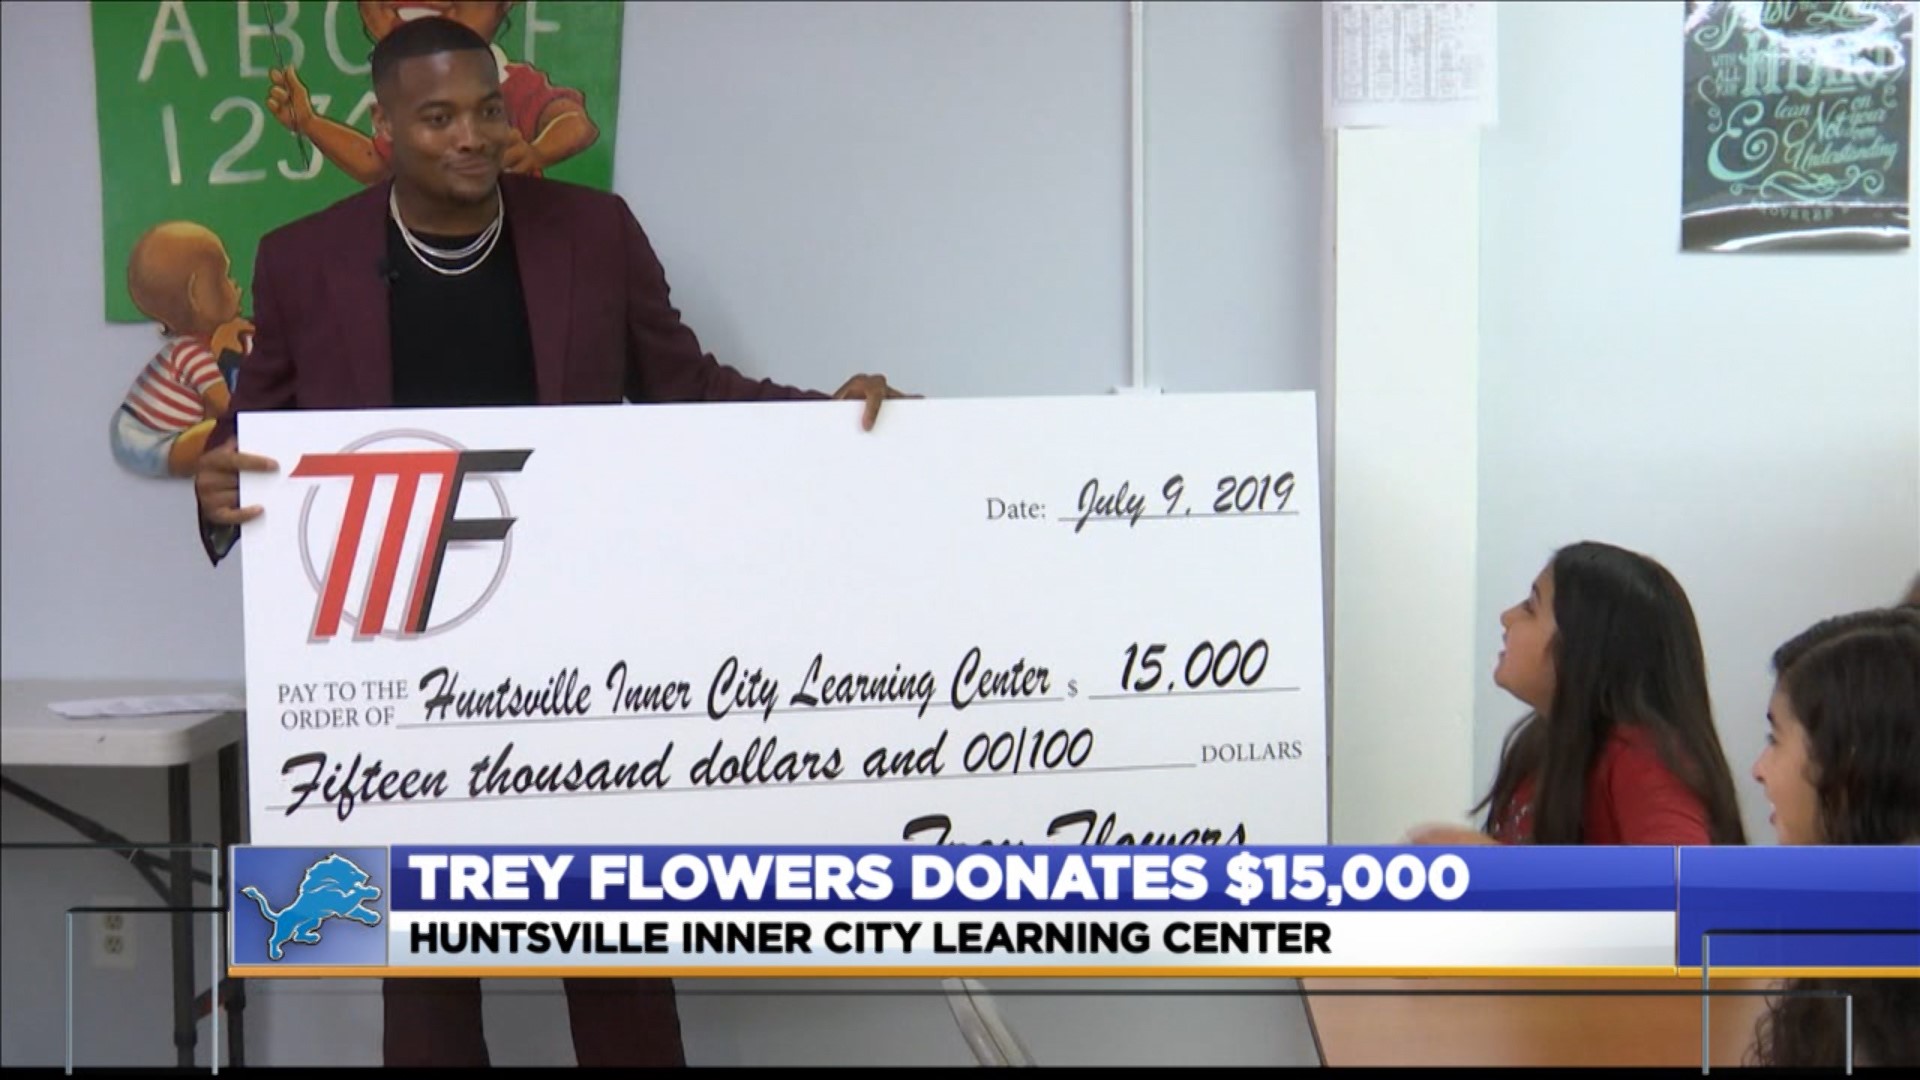 Huntsville native and current Detroit Lion Trey Flowers spoke to 70 students Tuesday at the Huntsville Inner City Learning Center. After he spoke with the students, the Super Bowl Champion donated $15,000 to the center.